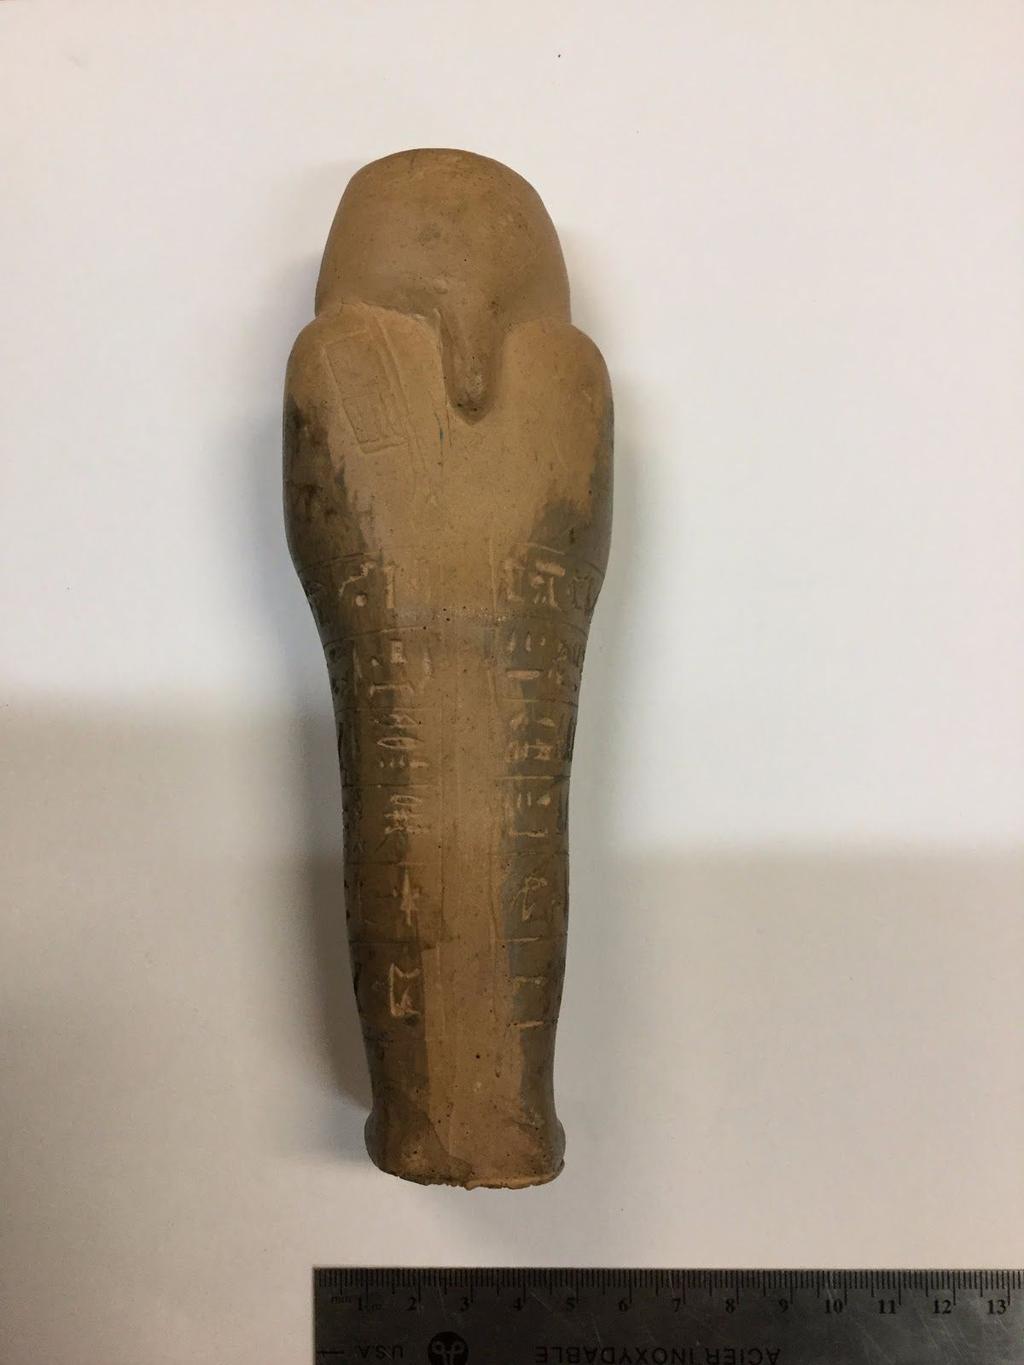 2 Figure 2. The back of the replica. The seed bag is visible on the left shoulder (photo by Evelyn Ullyott-Hayes) The shabti is 17.8 centimetres tall, 7 centimetres wide and 3 centimetres thick.